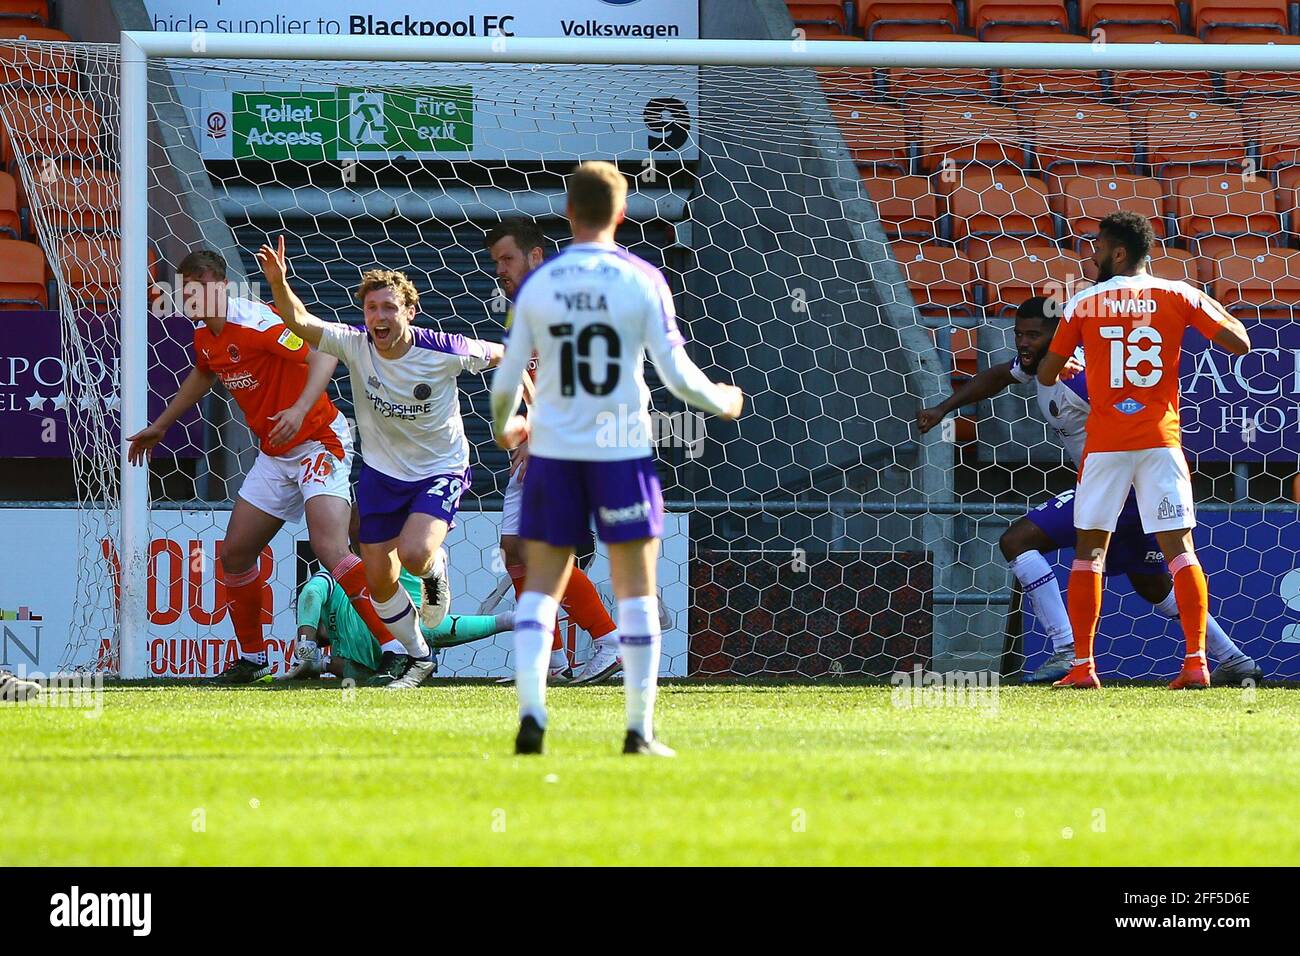 Bloomfield Road, Blackpool, UK. 24th Apr, 2021. Matthew Pennington (29) of Shrewsbury after scoring the only goal of the game 0 - 1 during the game Blackpool v Shrewsbury Sky Bet League One 2020/21 Bloomfield Road, Blackpool, England - 24th April 2021 Credit: Arthur Haigh/Alamy Live News Stock Photo